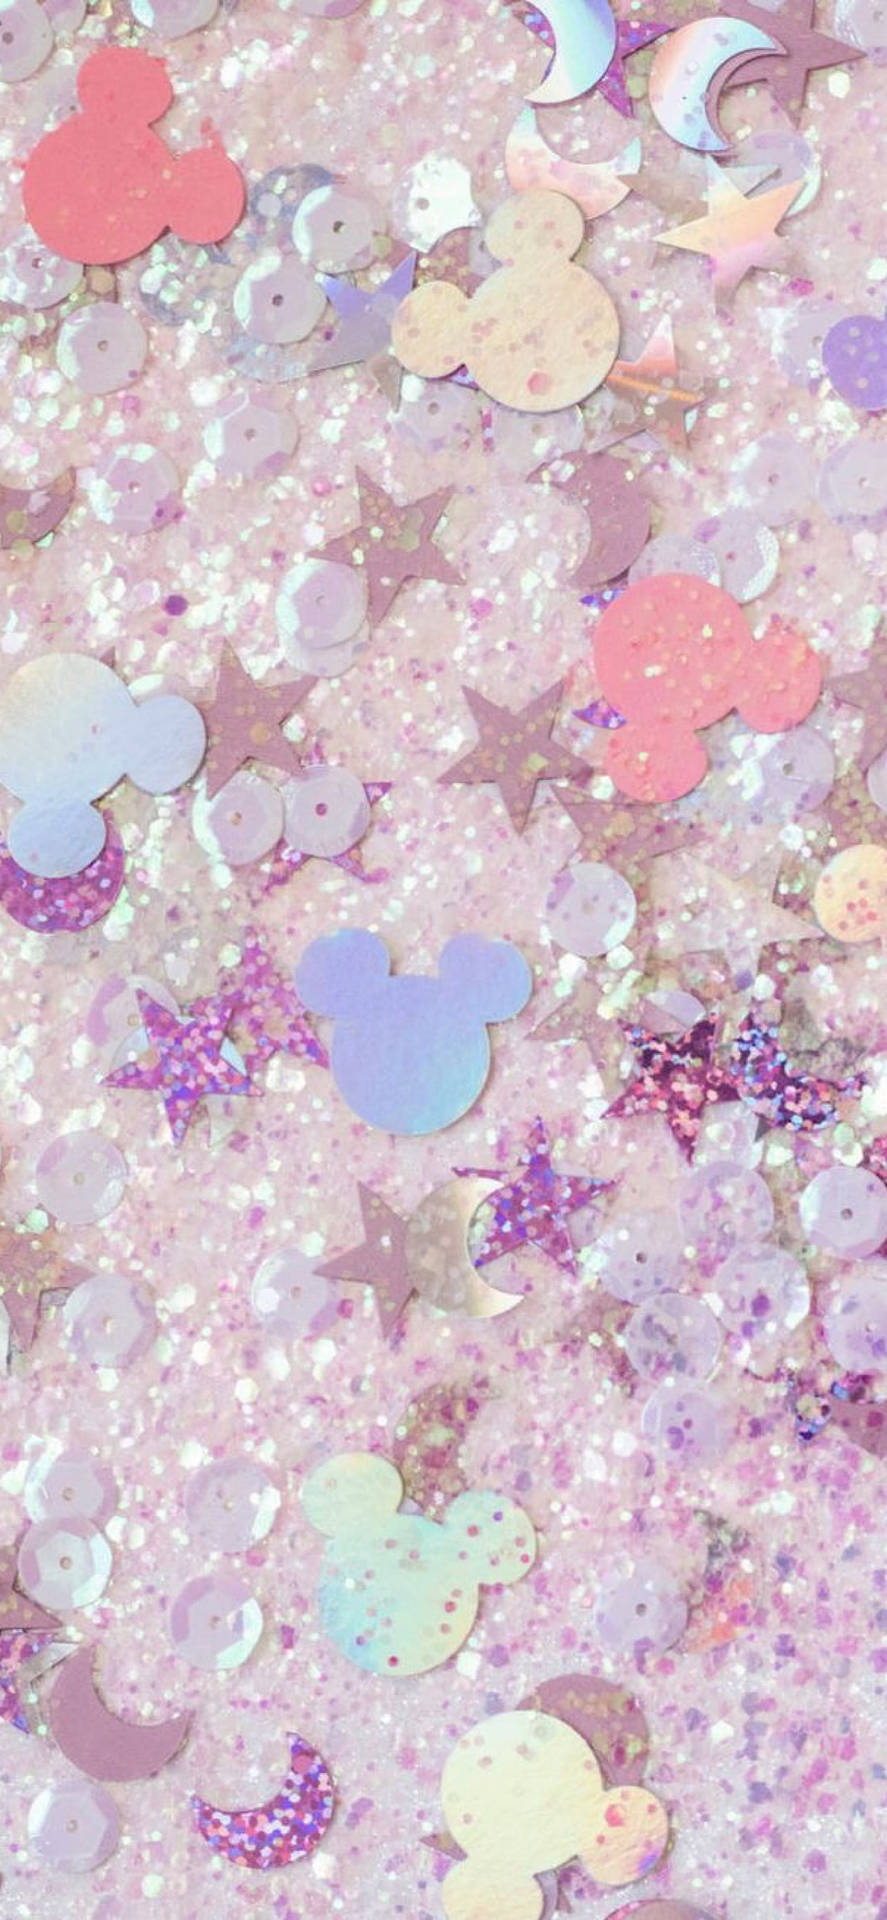 Sparkly And Glittery Disney Phone Background